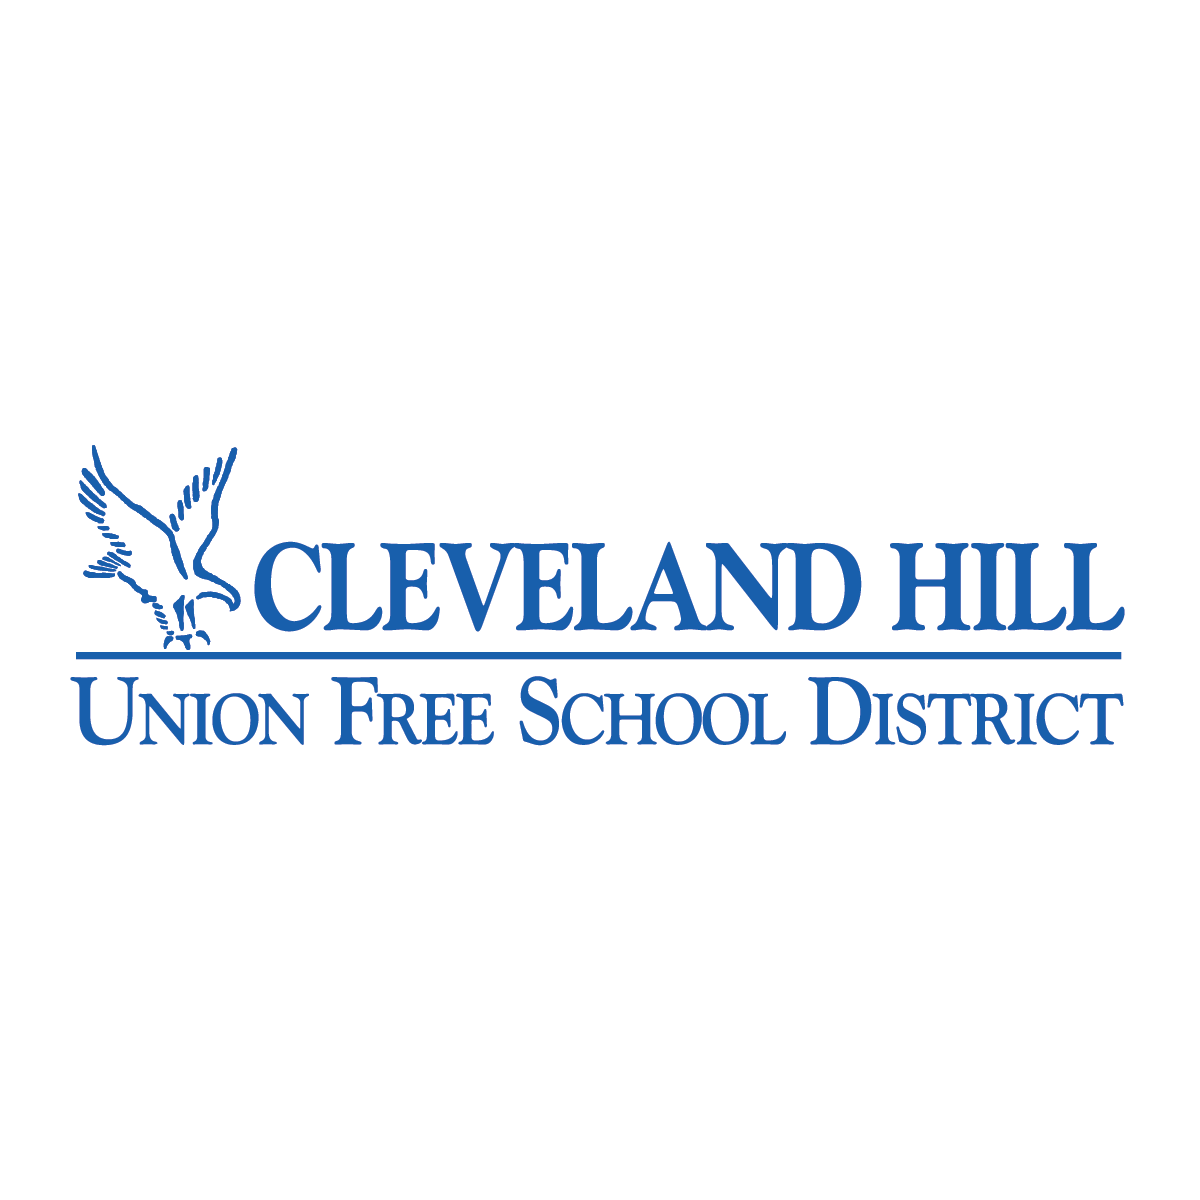 Cleveland Hill Union Free School District